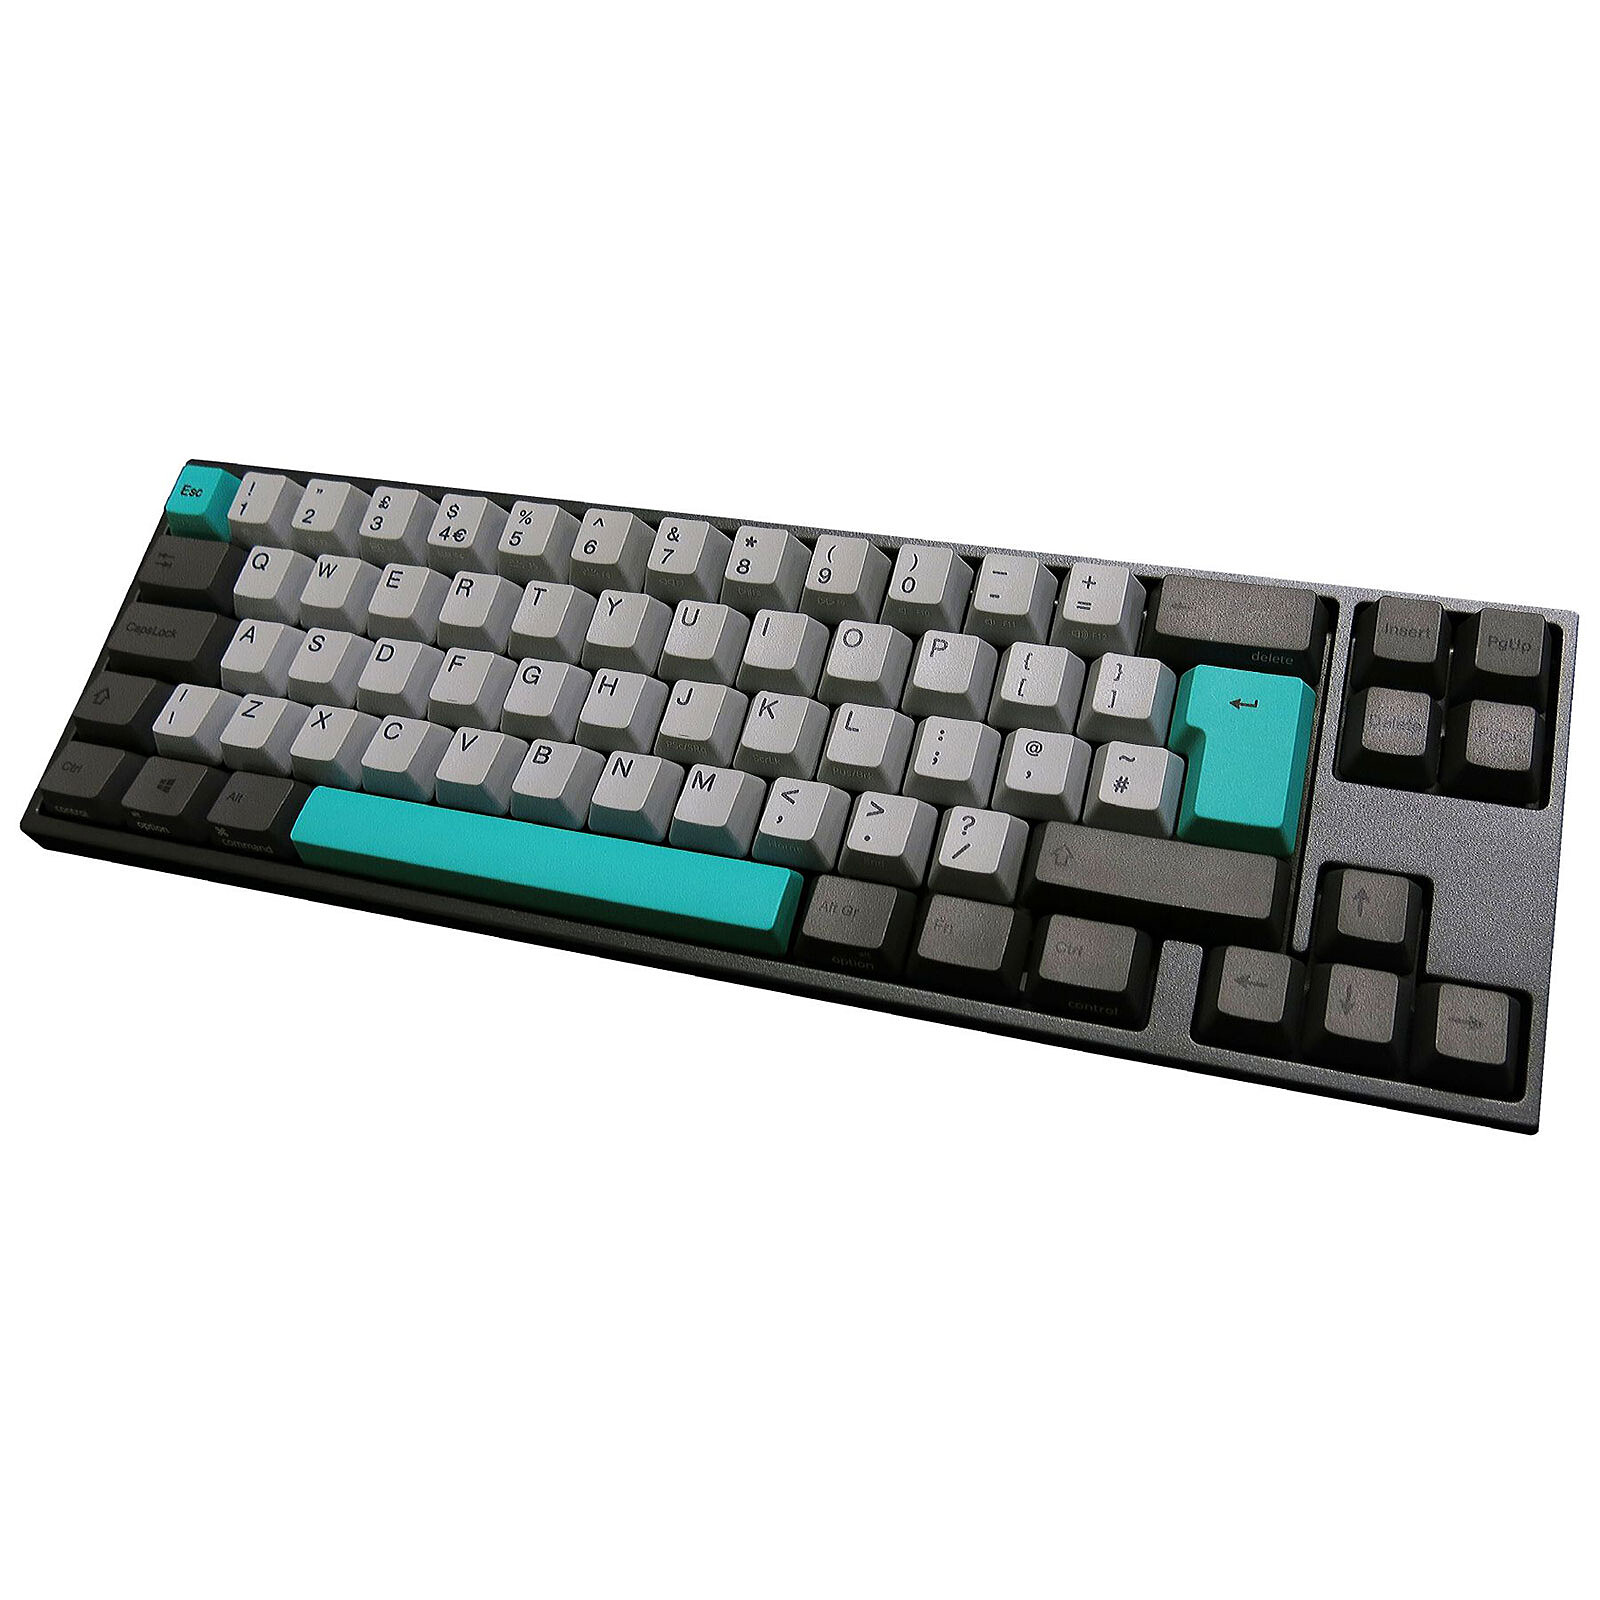 Ducky Channel Miya Pro Moonlight Cherry Mx Silent Red Clavier Pc Ducky Channel Sur Ldlc Com